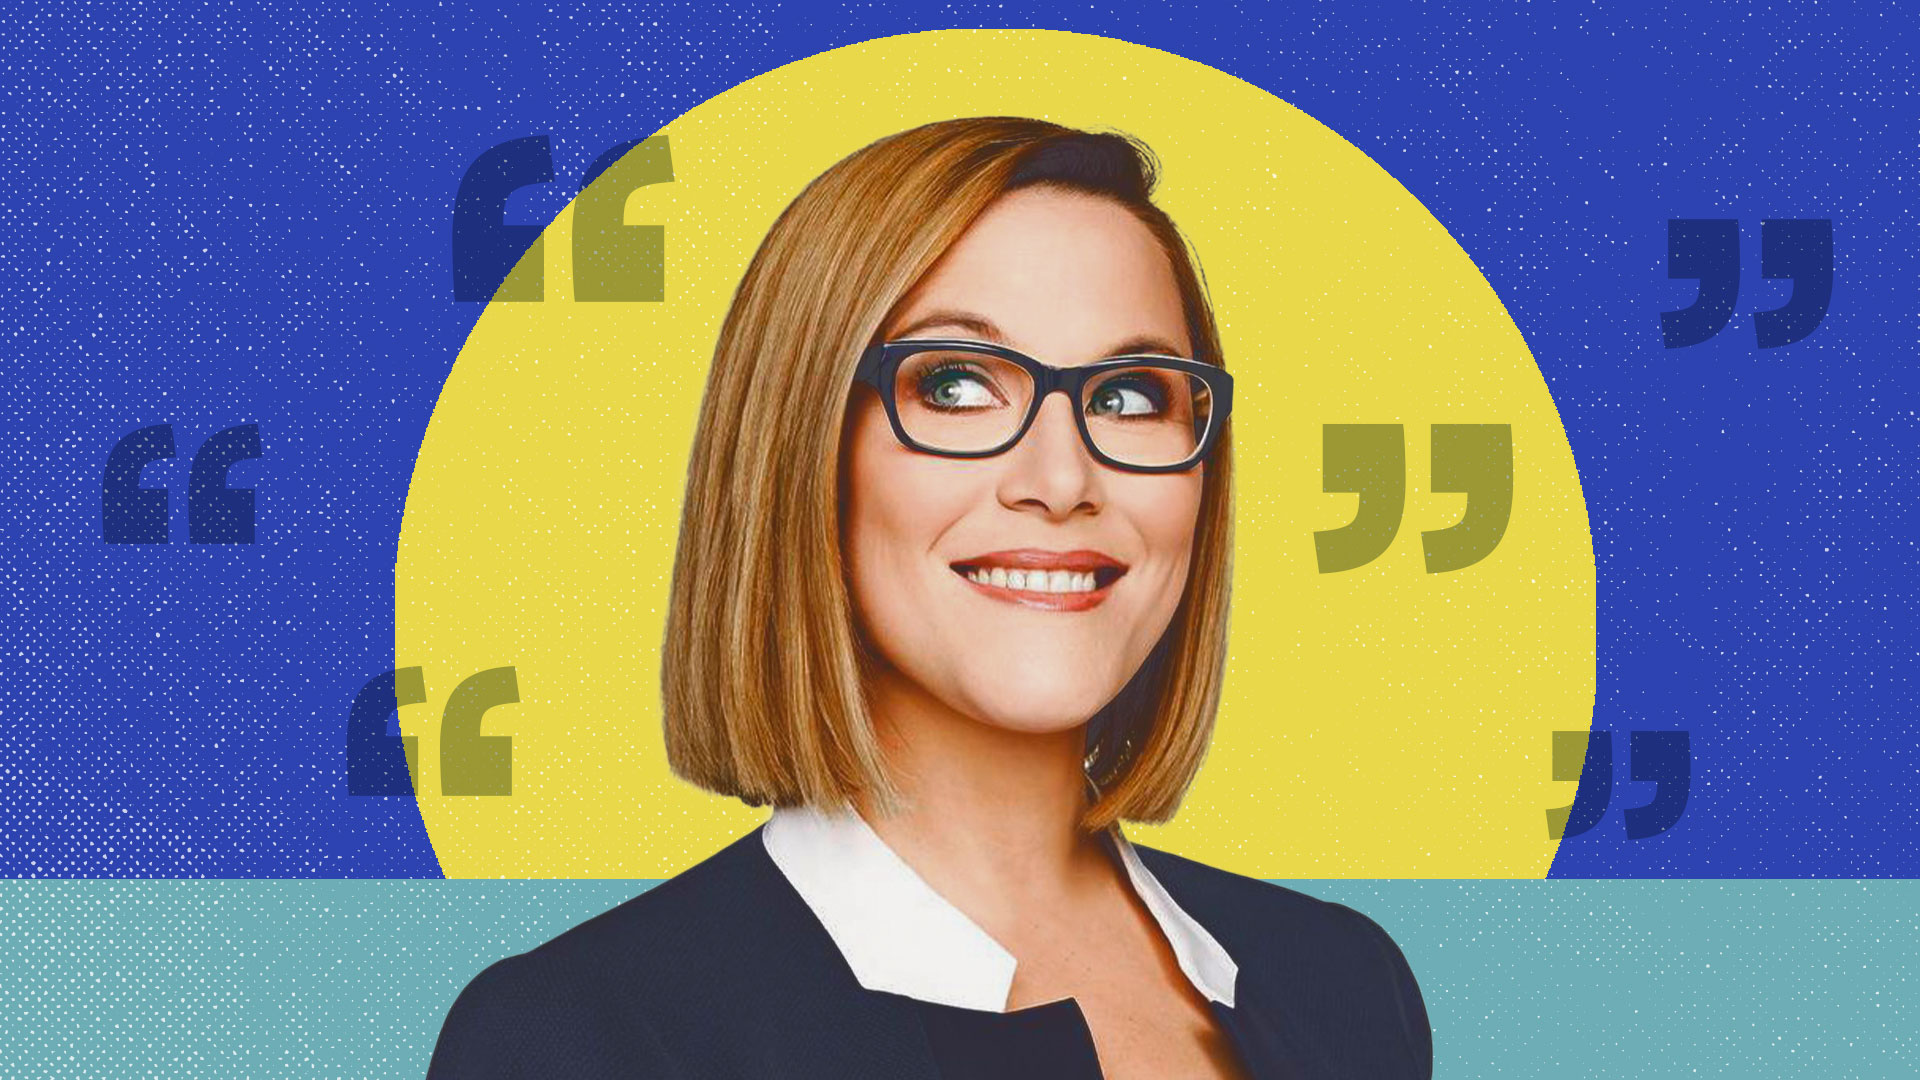 SE Cupp with a blue, yellow and green colored background and quotation marks floating around her